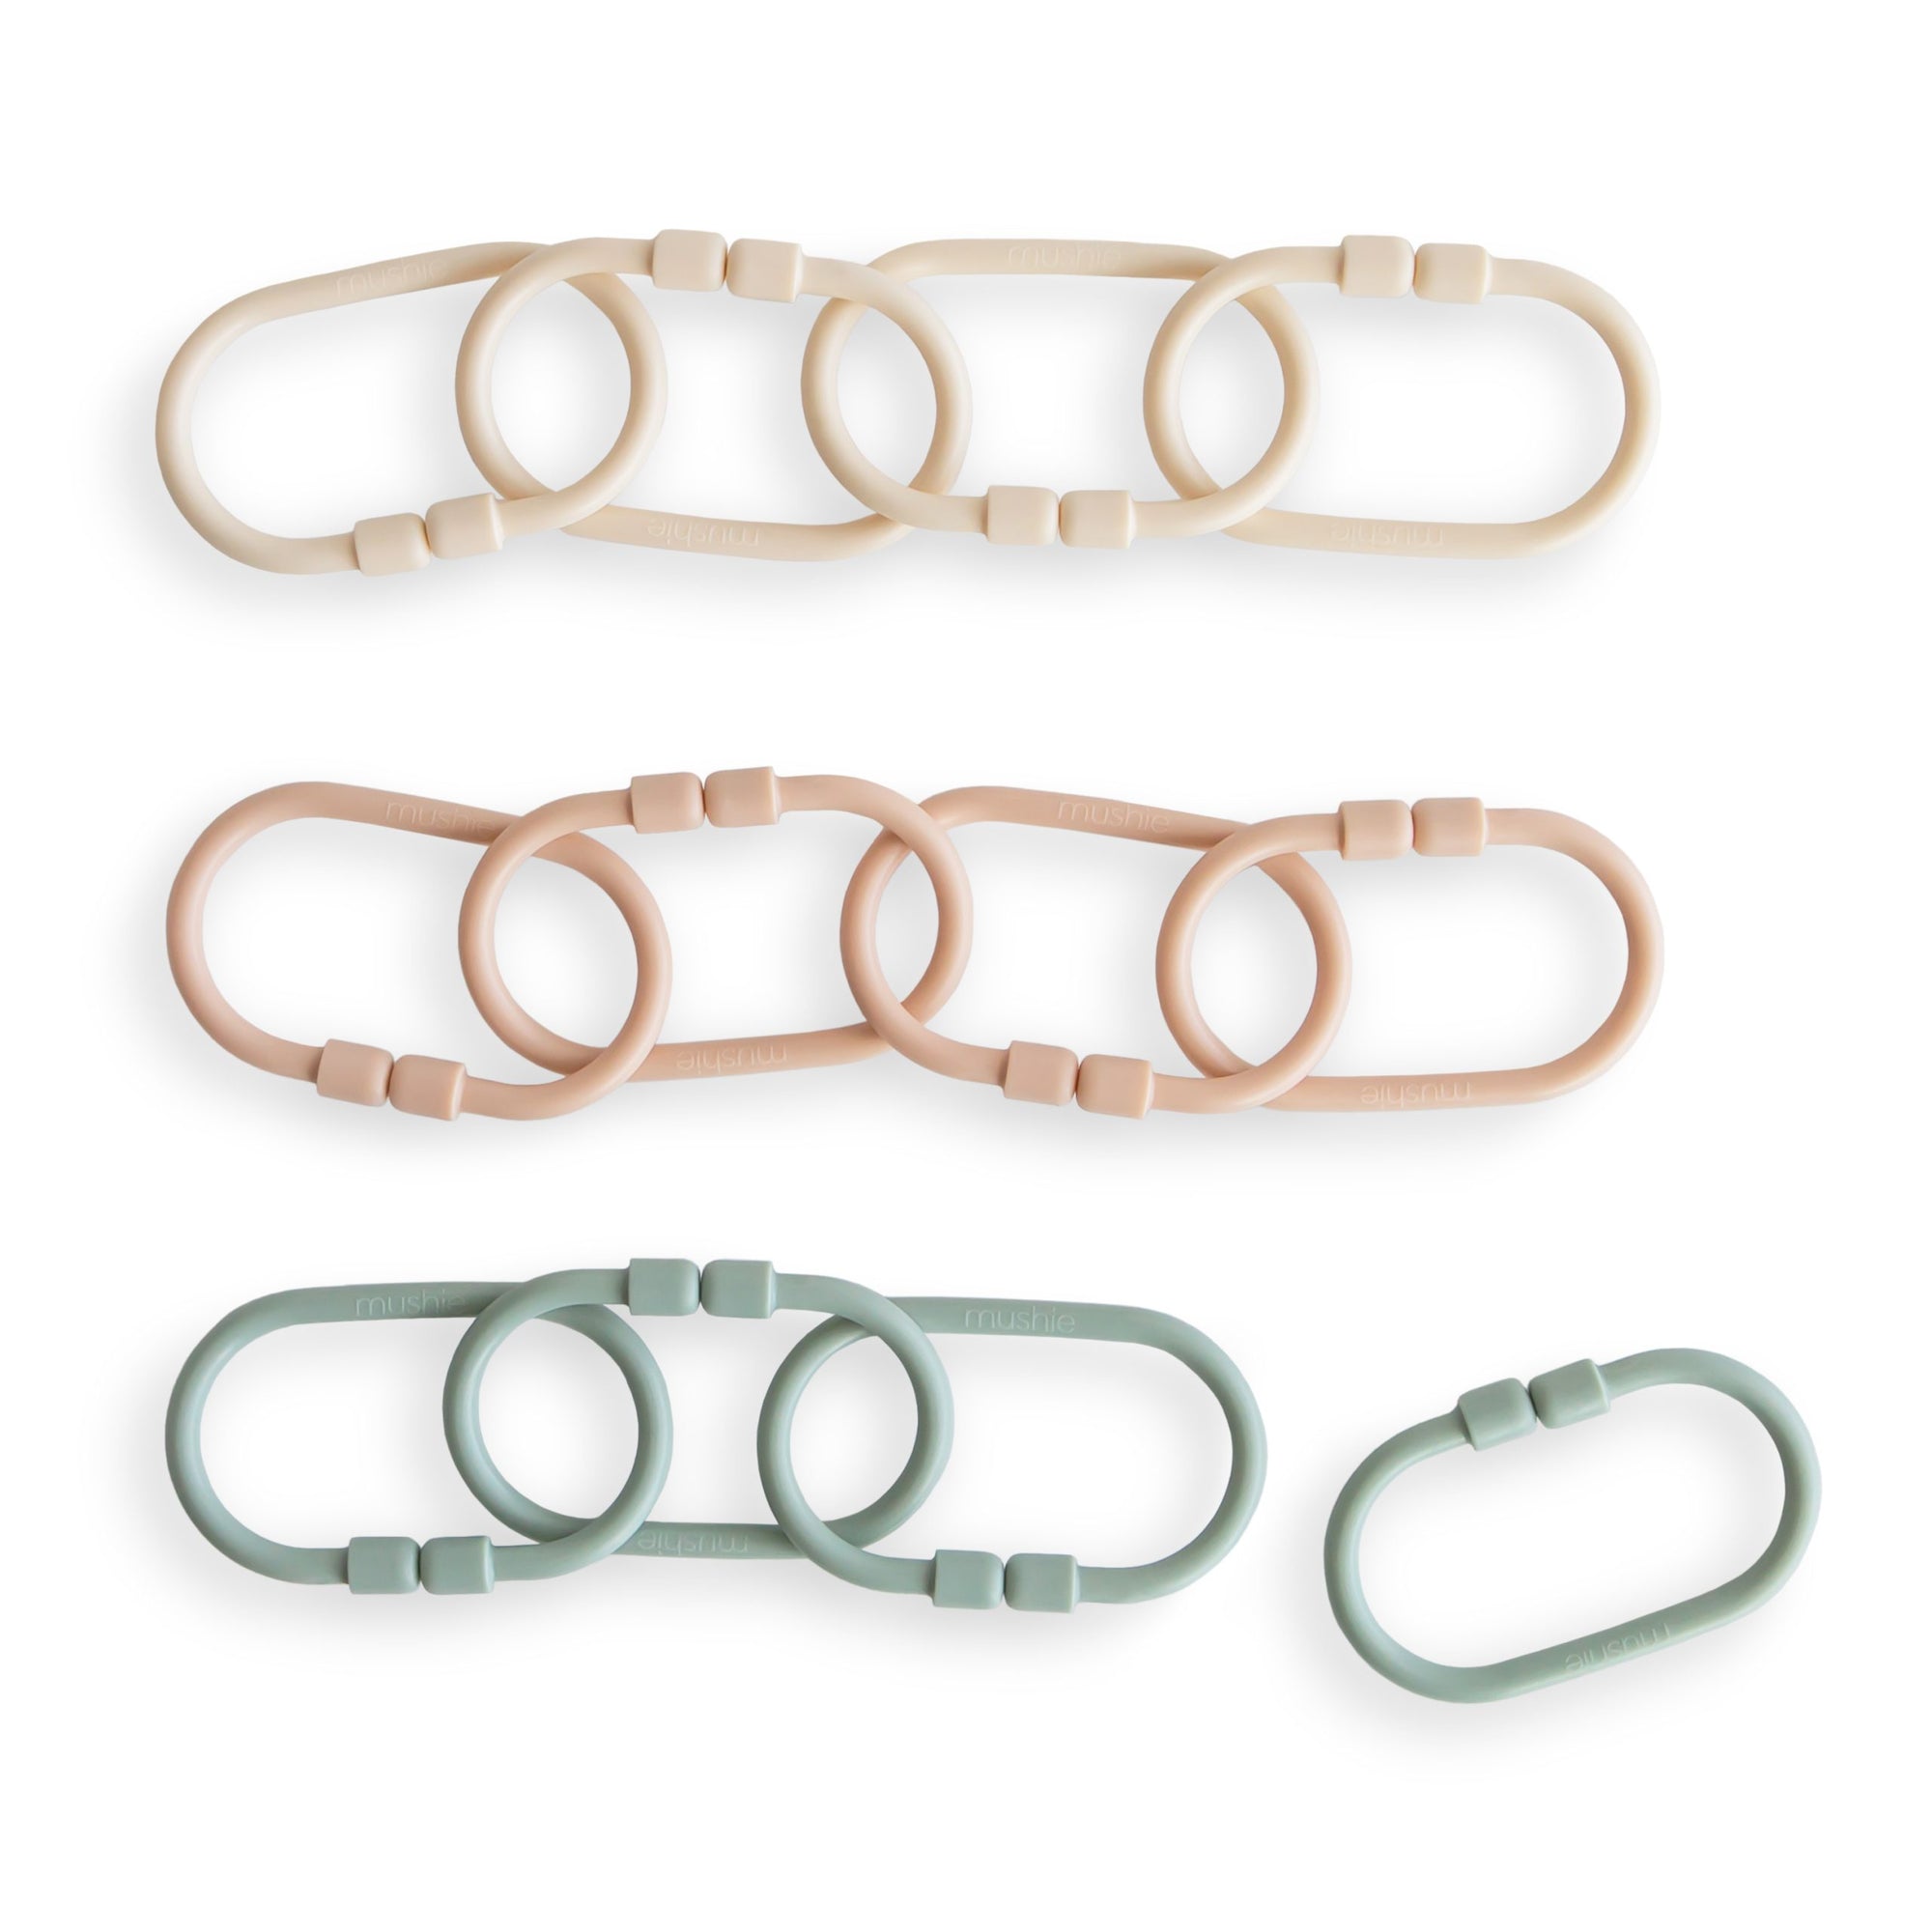 Chain Link Rings, Sand/Blush/Blue, Set of 12